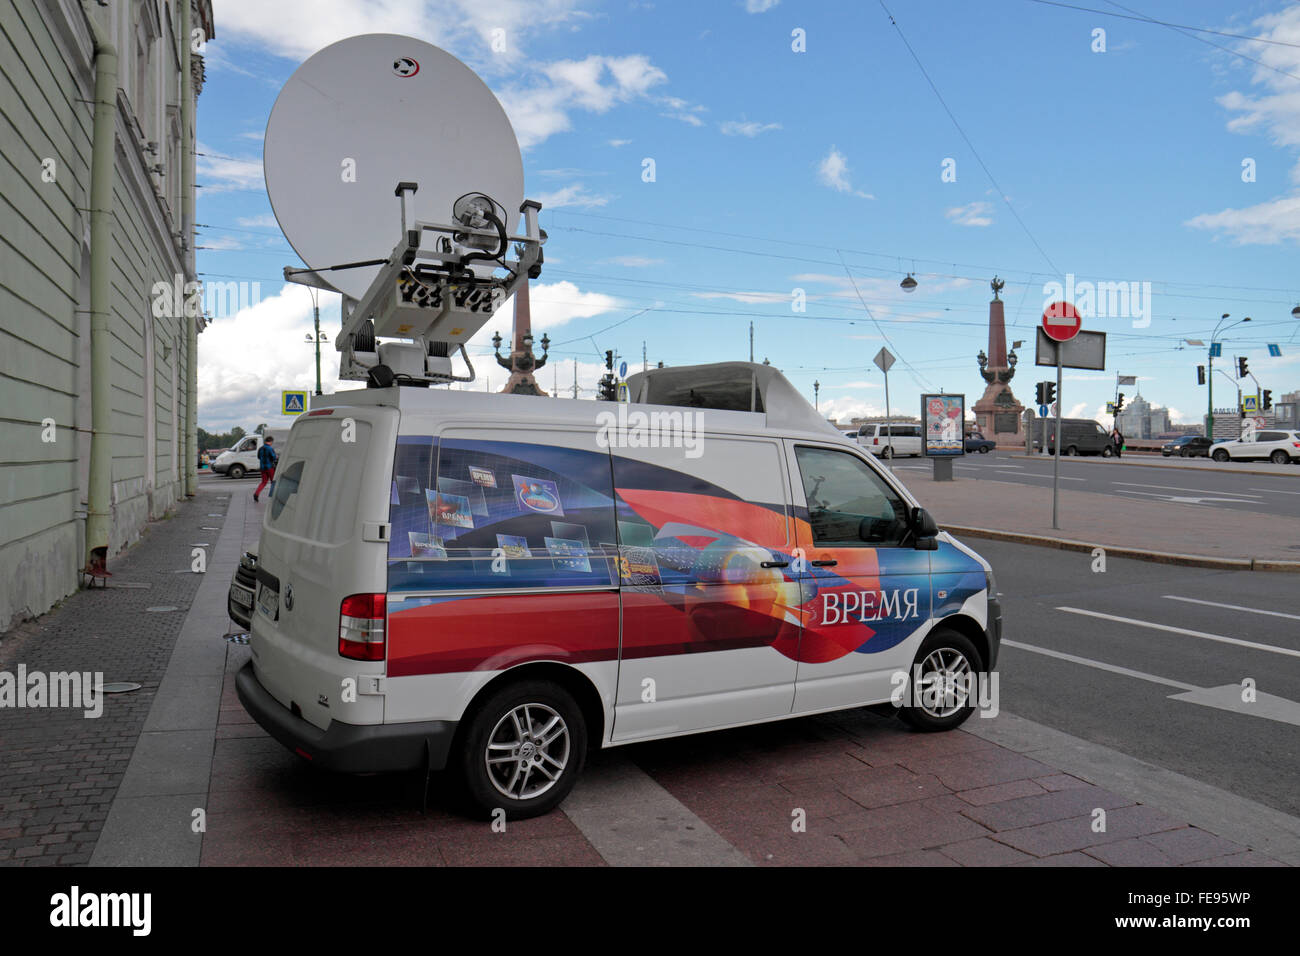 A mobile satellite television truck (Вре́мя) parked in St Petersburg, Russia  Stock Photo - Alamy